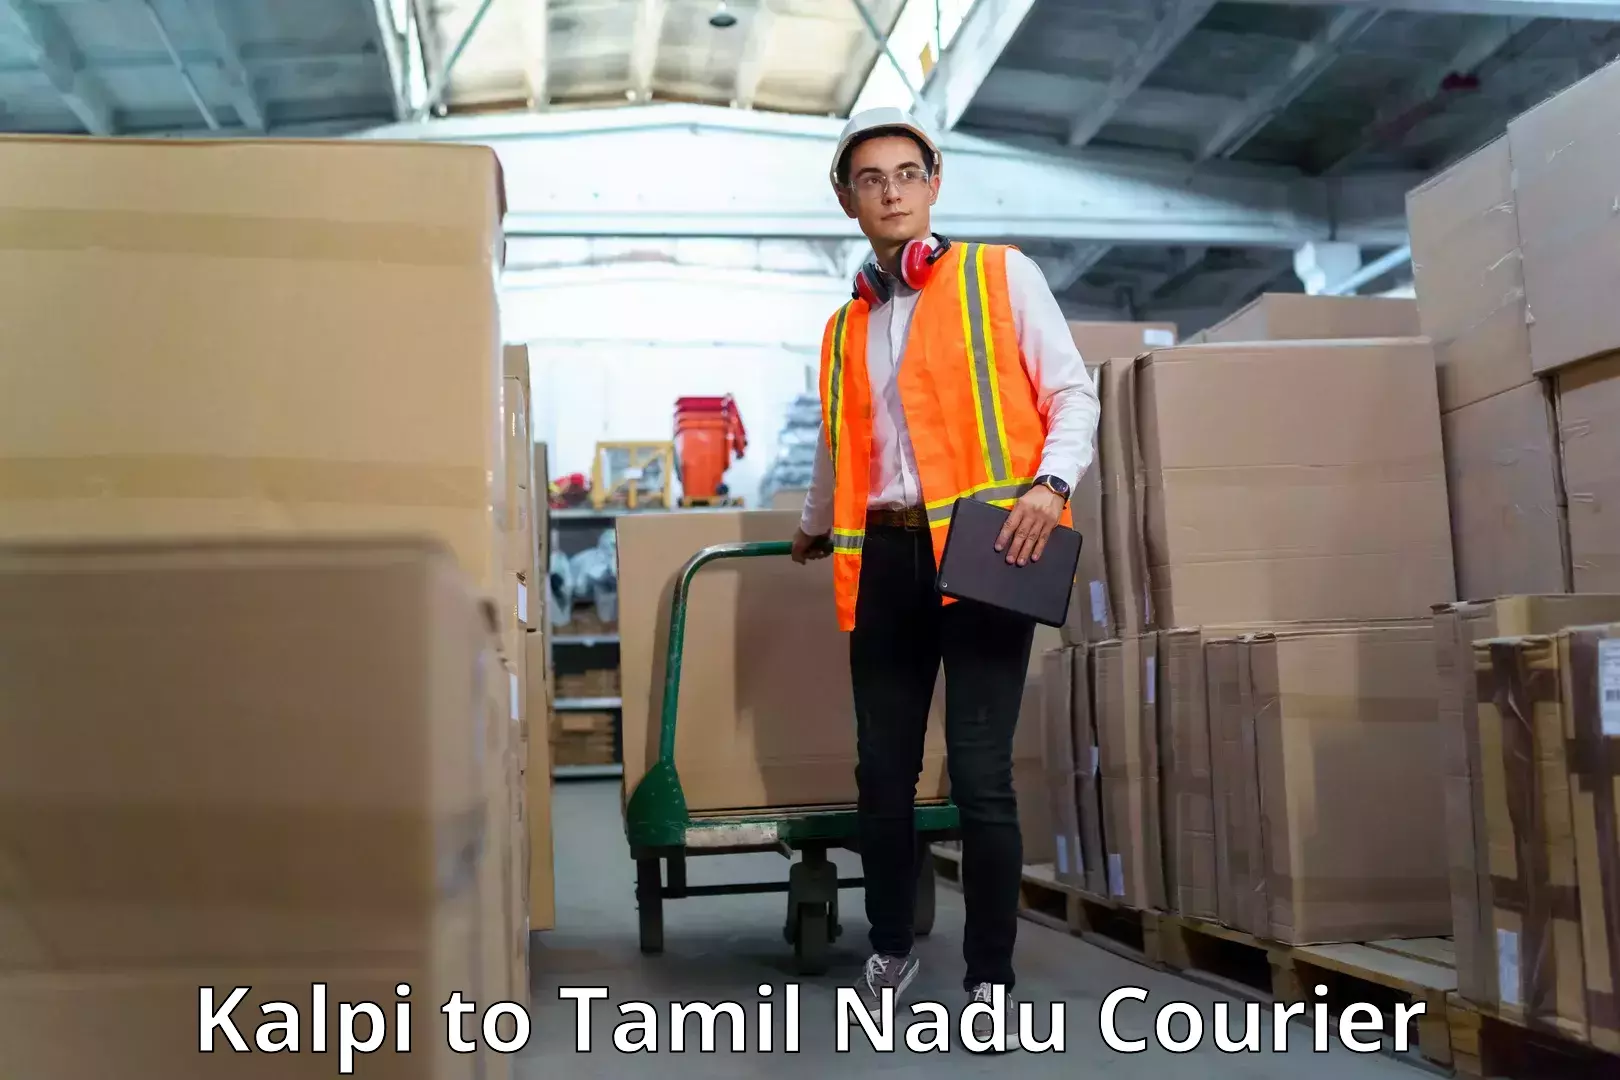 Efficient order fulfillment in Kalpi to Vellore